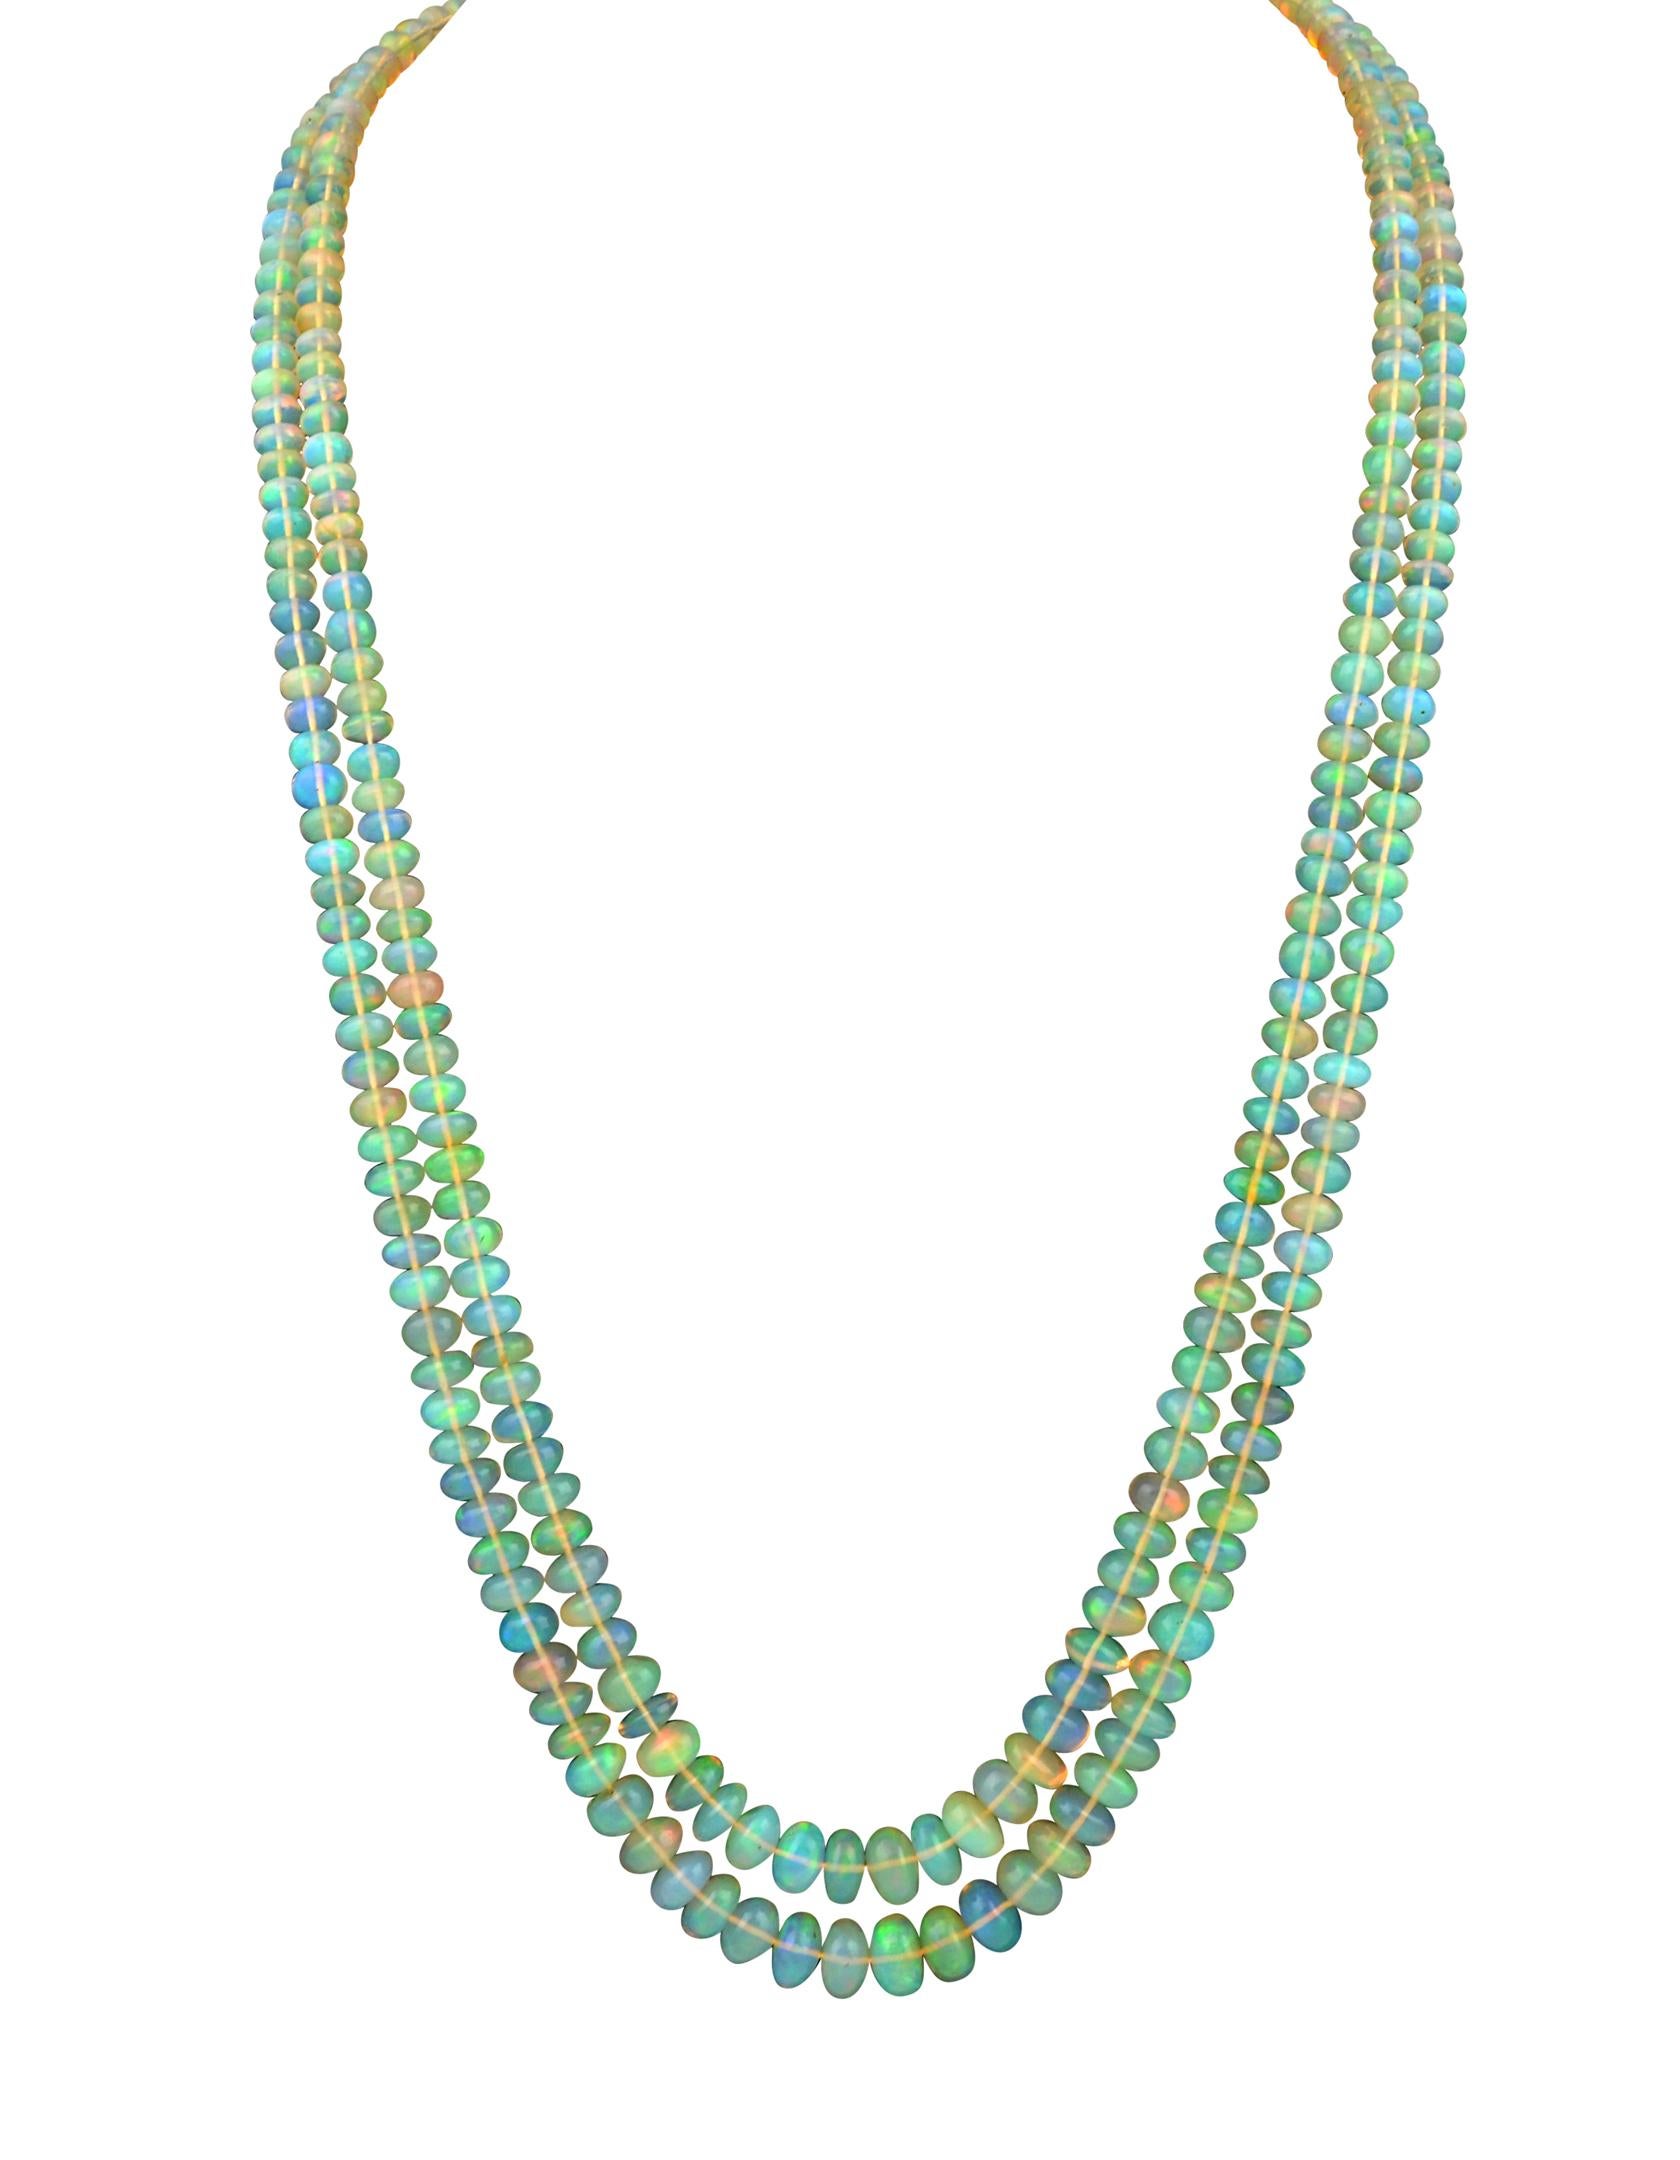  Natural 265 Ct Ethiopian Opal Bead Double Strand Necklace Opera Length 24 Inch 14 karat yellow gold adjustable clasp
22-24  inch adjustable  length 
2 layers of Natural opal  Beads
These are Smooth beads , have  very much  Luster and